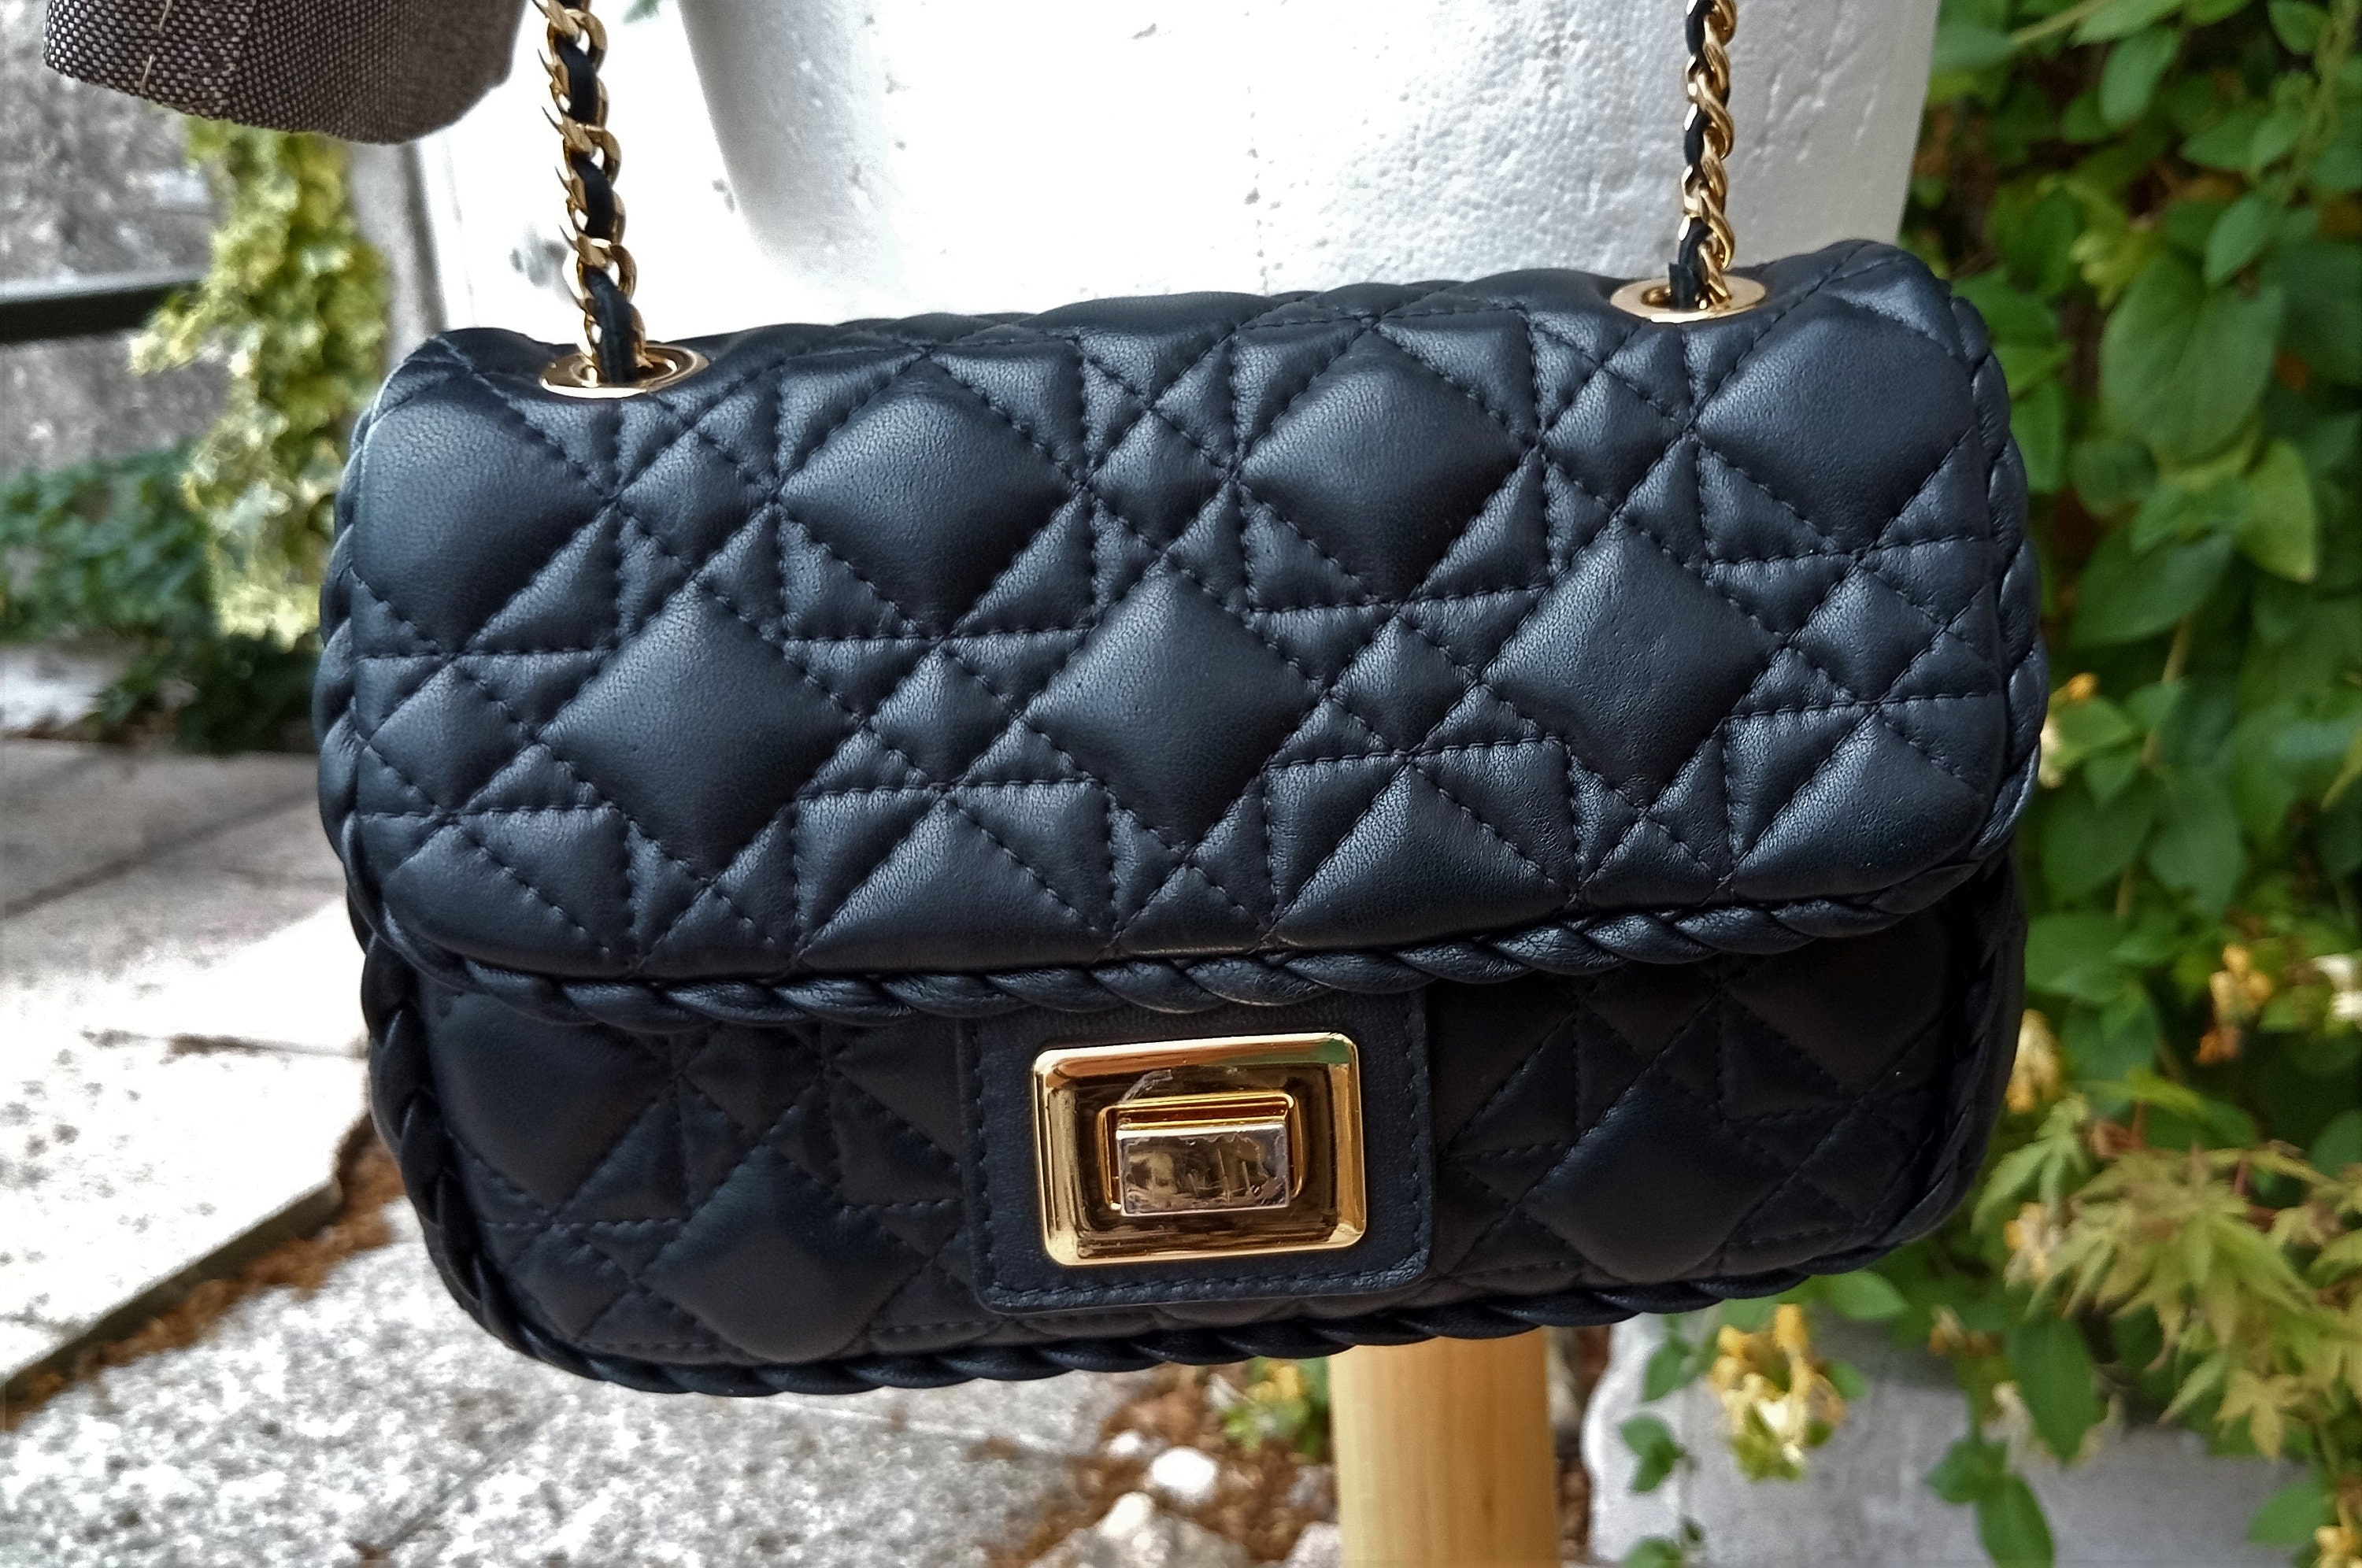 Vintage Bally Black Leather Quilted Chain Strap Handbag